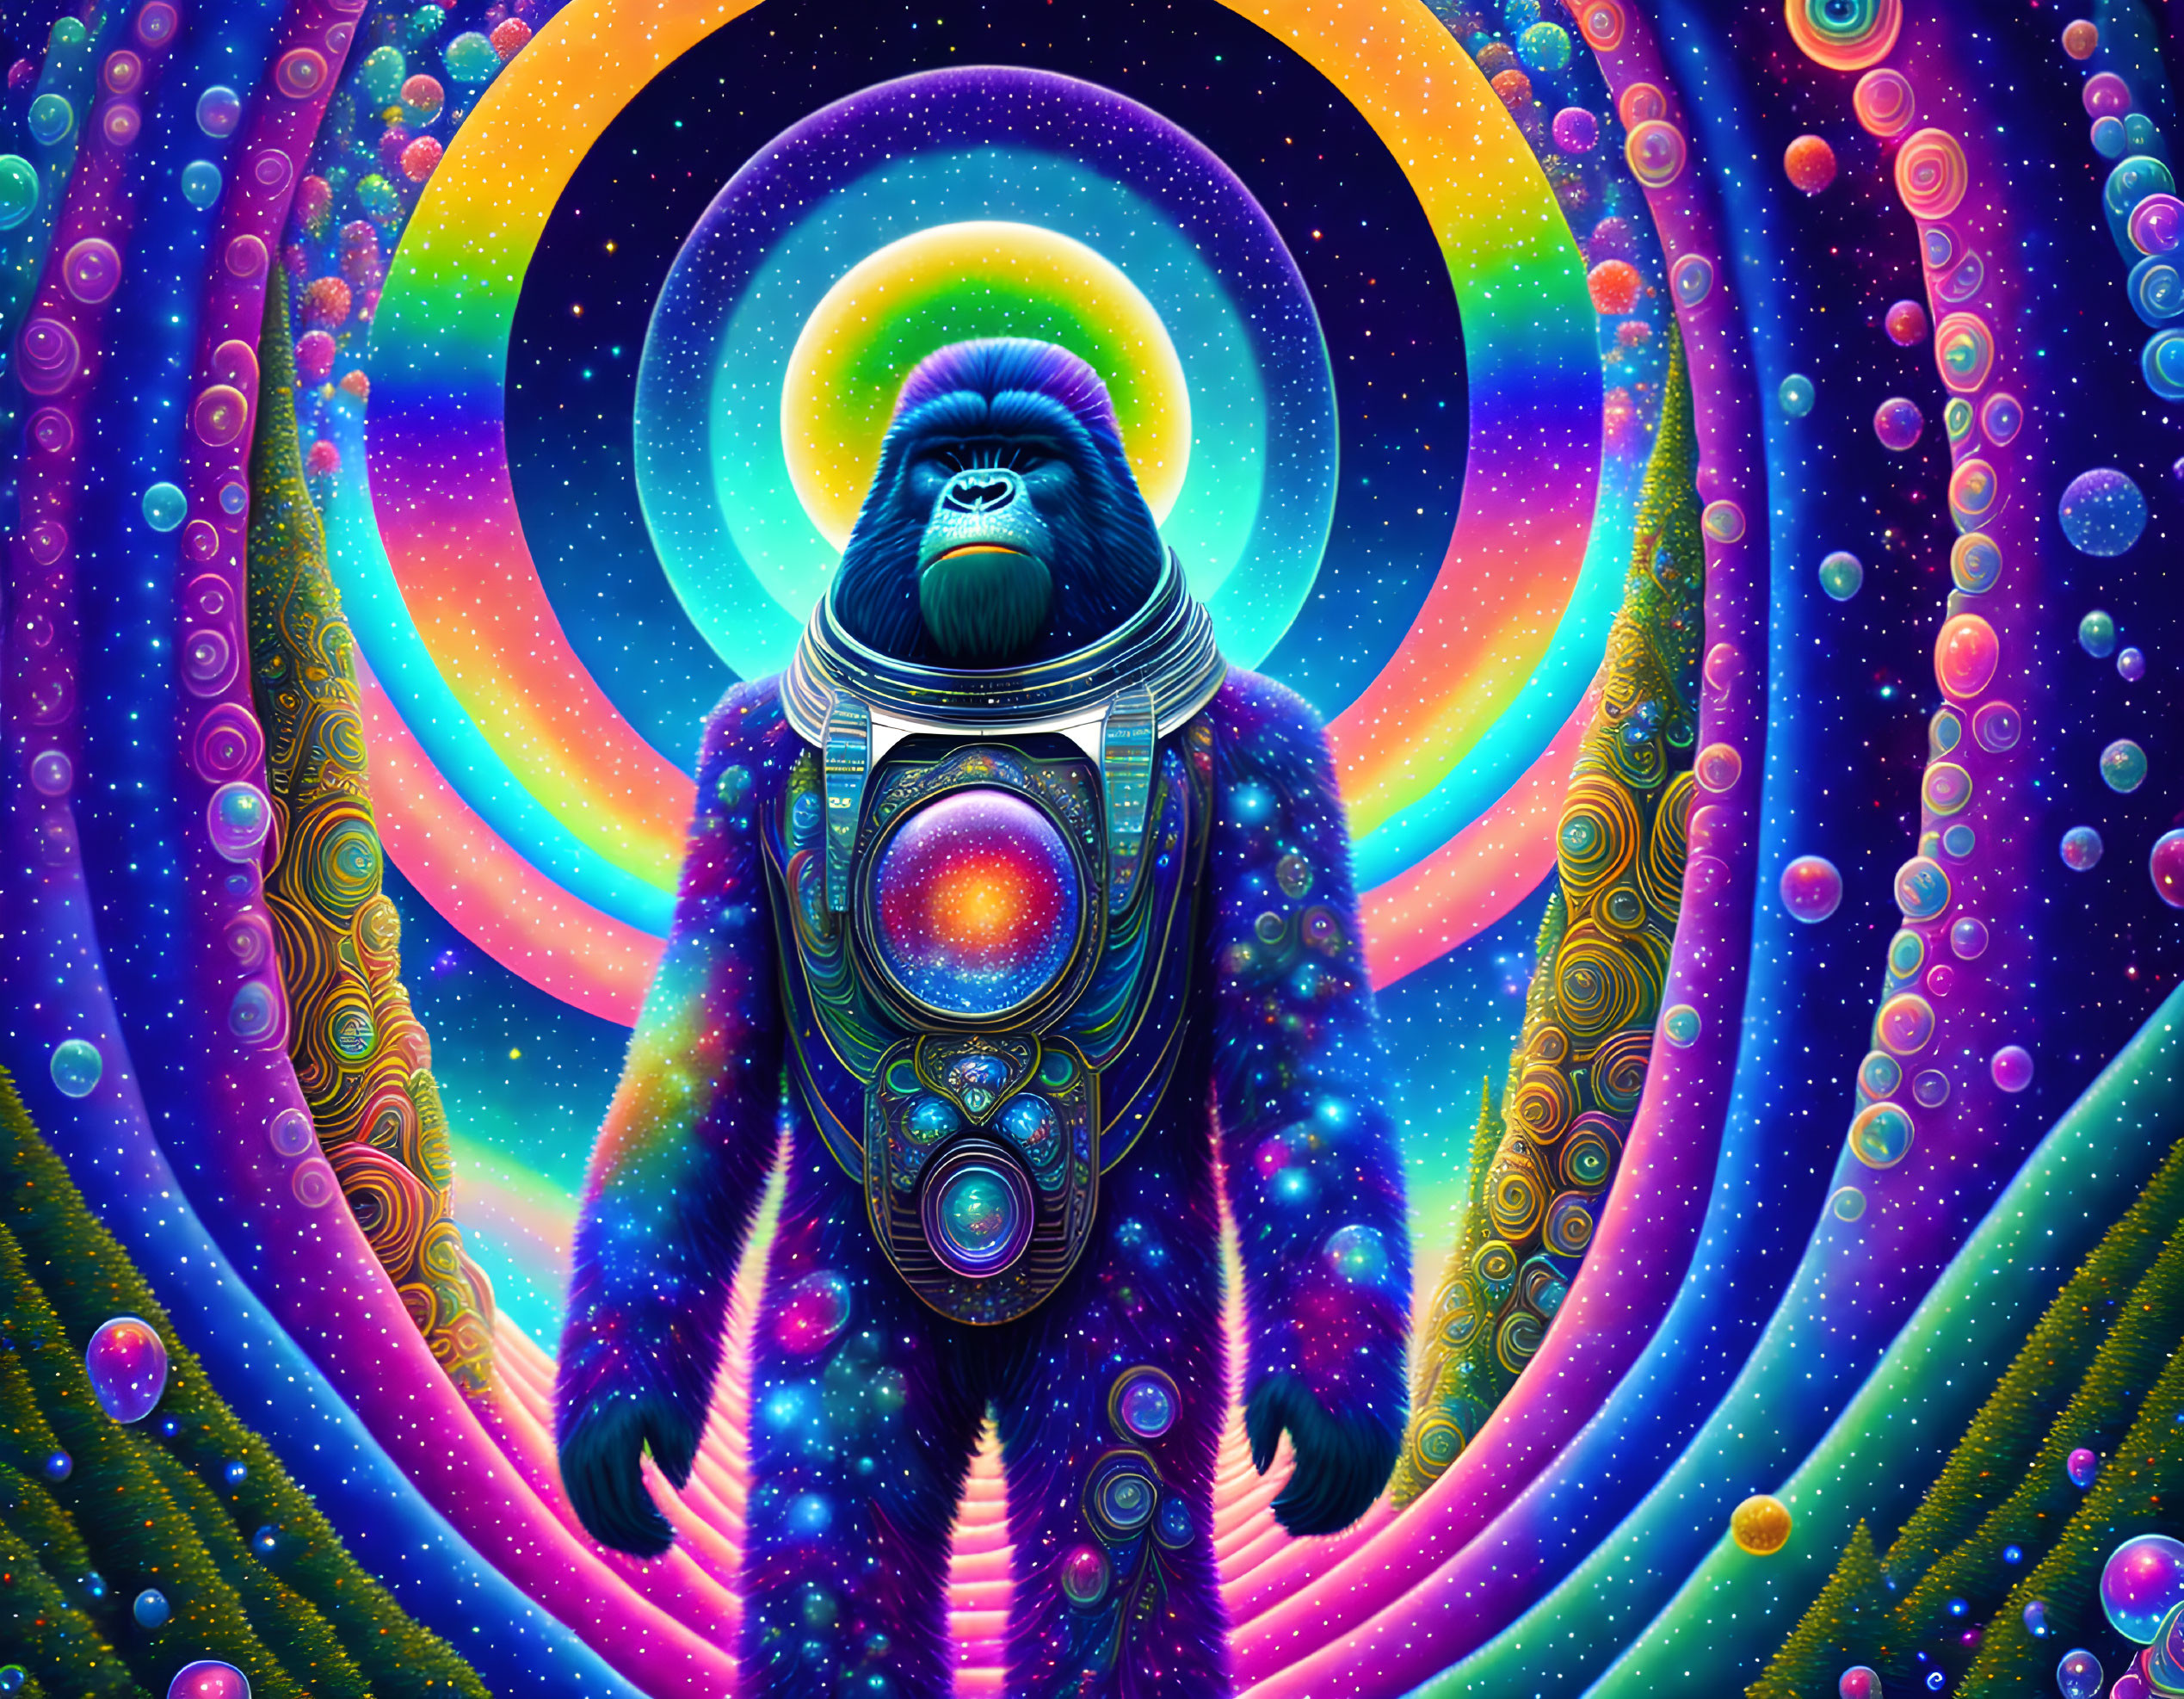 Bigfoot wearing space gear in a psychedelic forest